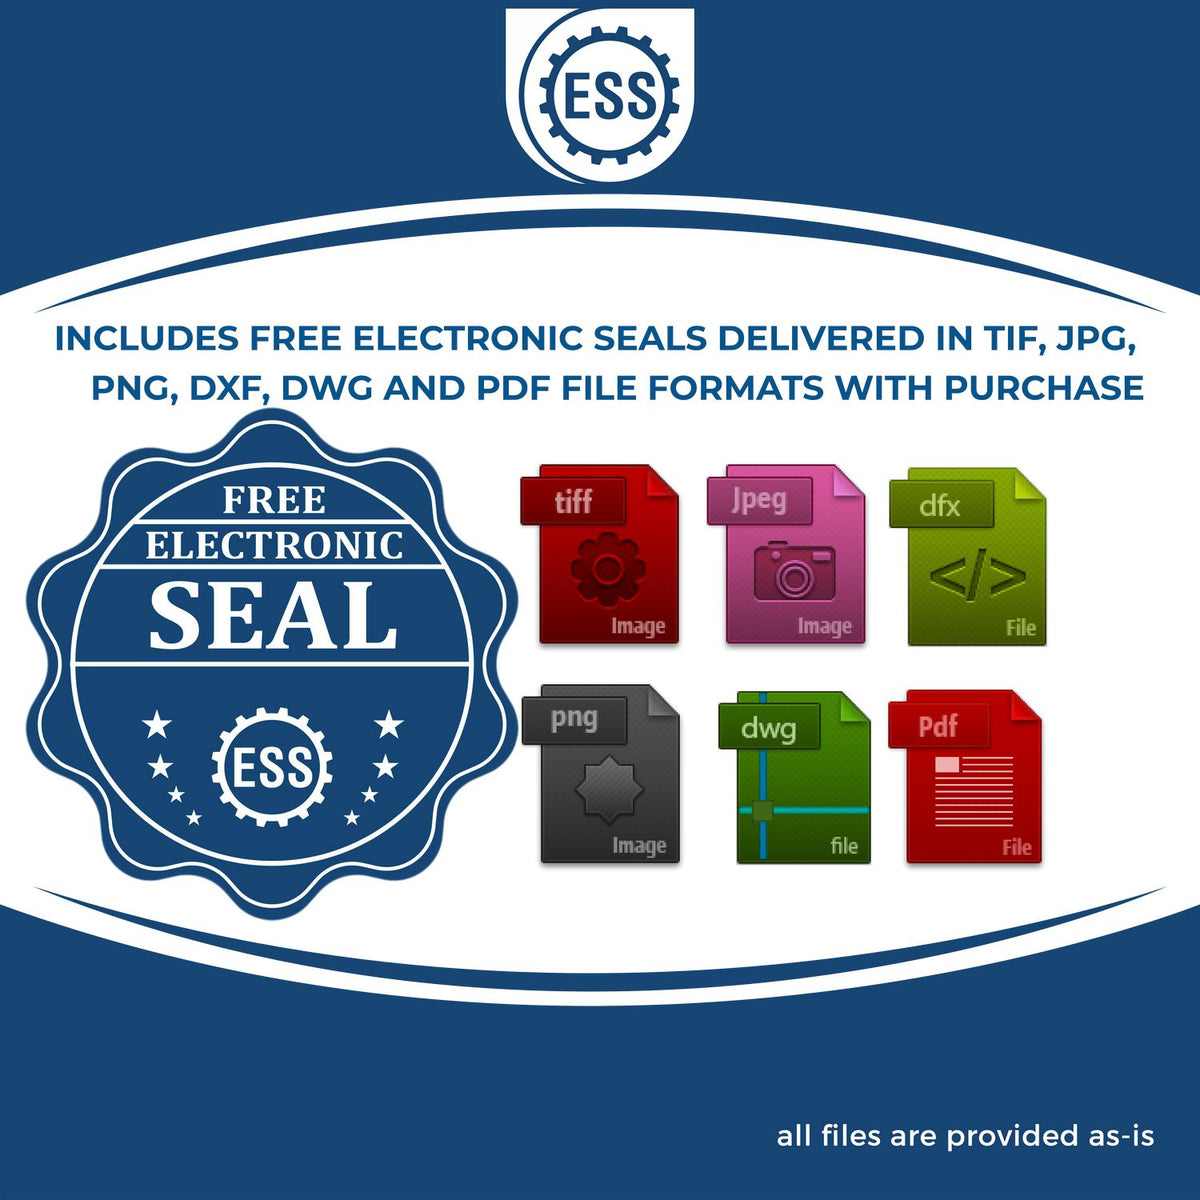 An infographic for the free electronic seal for the Long Reach Georgia Land Surveyor Seal illustrating the different file type icons such as DXF, DWG, TIF, JPG and PNG.